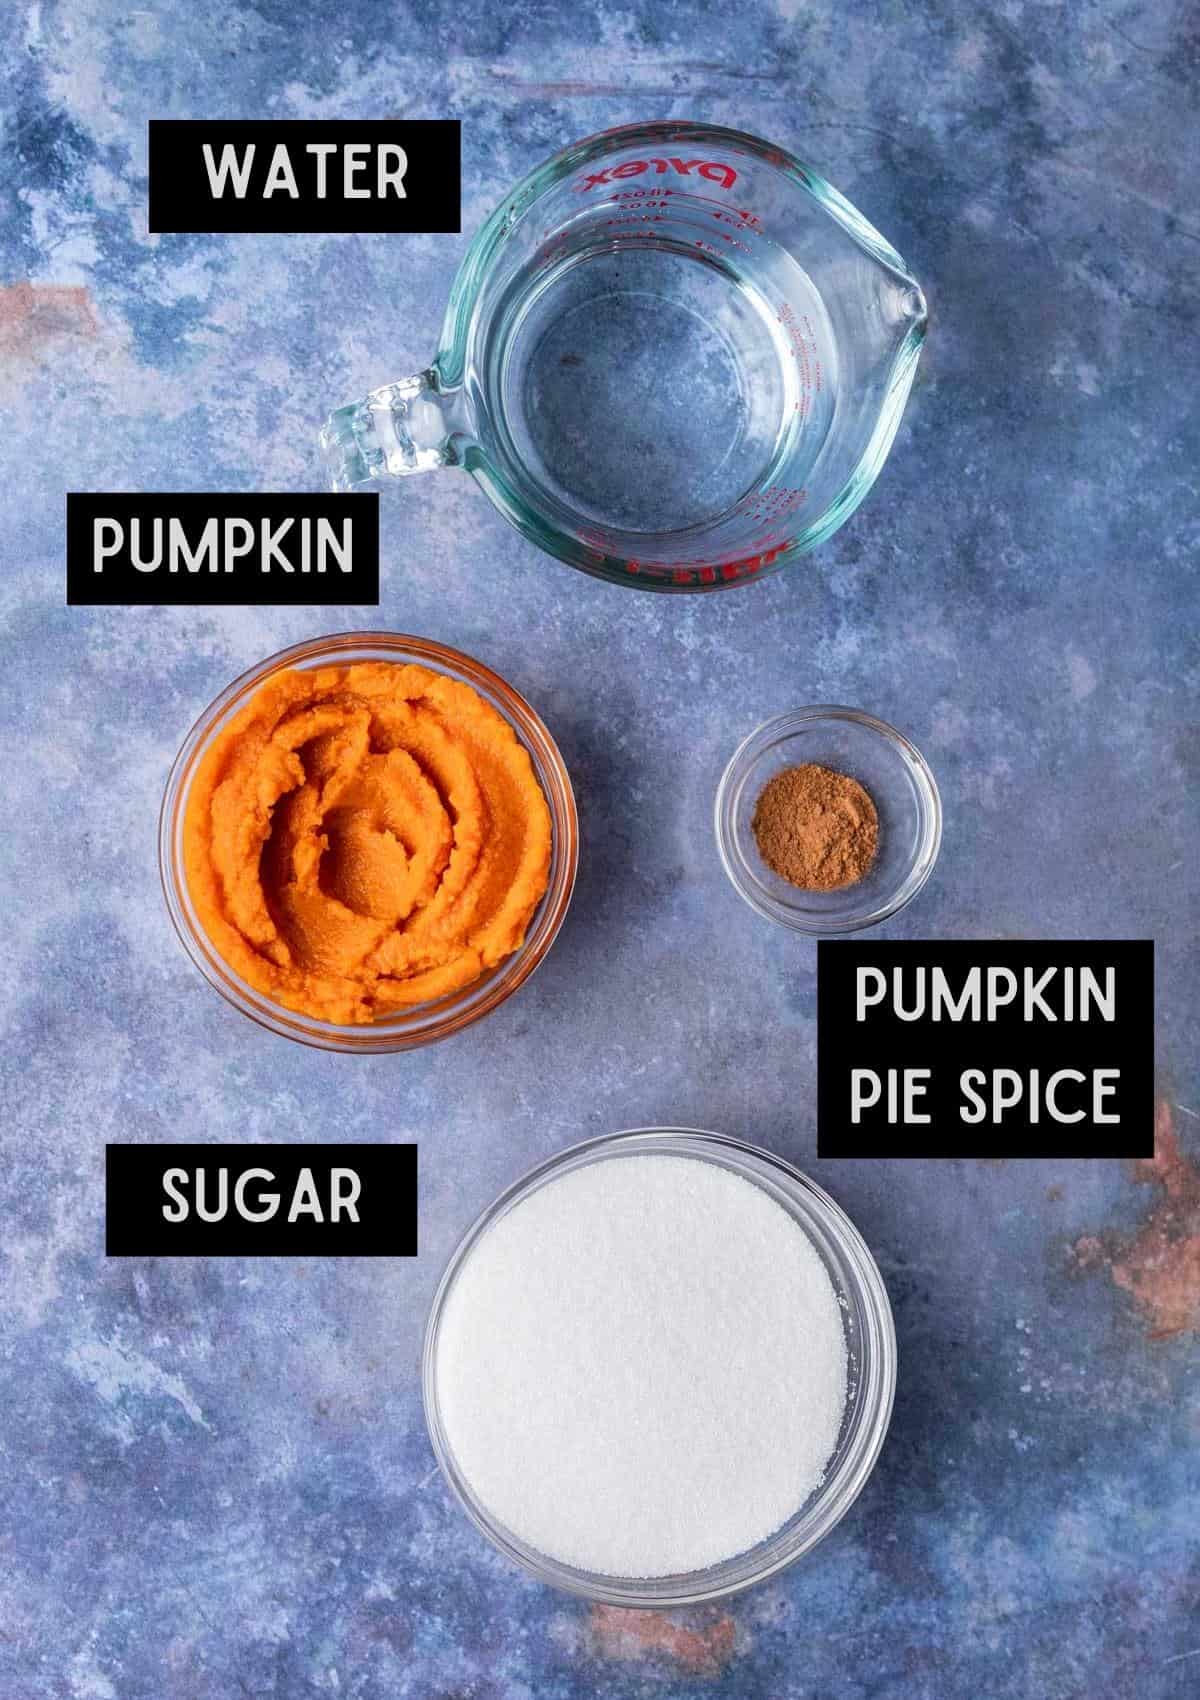 Labelled ingredients for pumpkin spice simple syrup (see recipe for details).